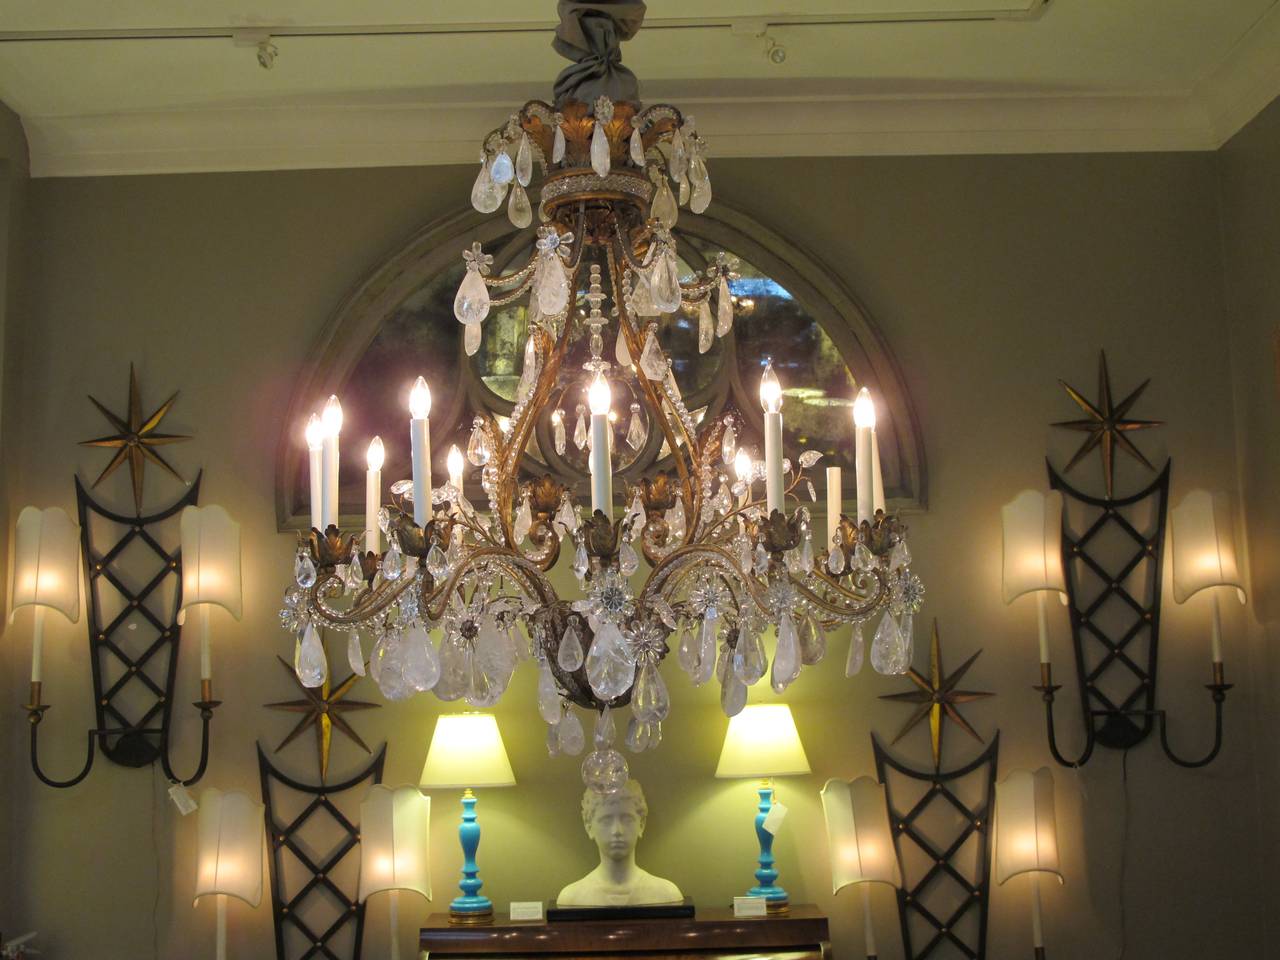 An exceptional French rococo style gilt-iron and tole rock crystal twelve-light chandelier by Nesle, Inc.; the large-scaled gilt-iron and tole chandelier emanating 12 scrolled beaded arms; adorned overall with robust rock crystal pendants and